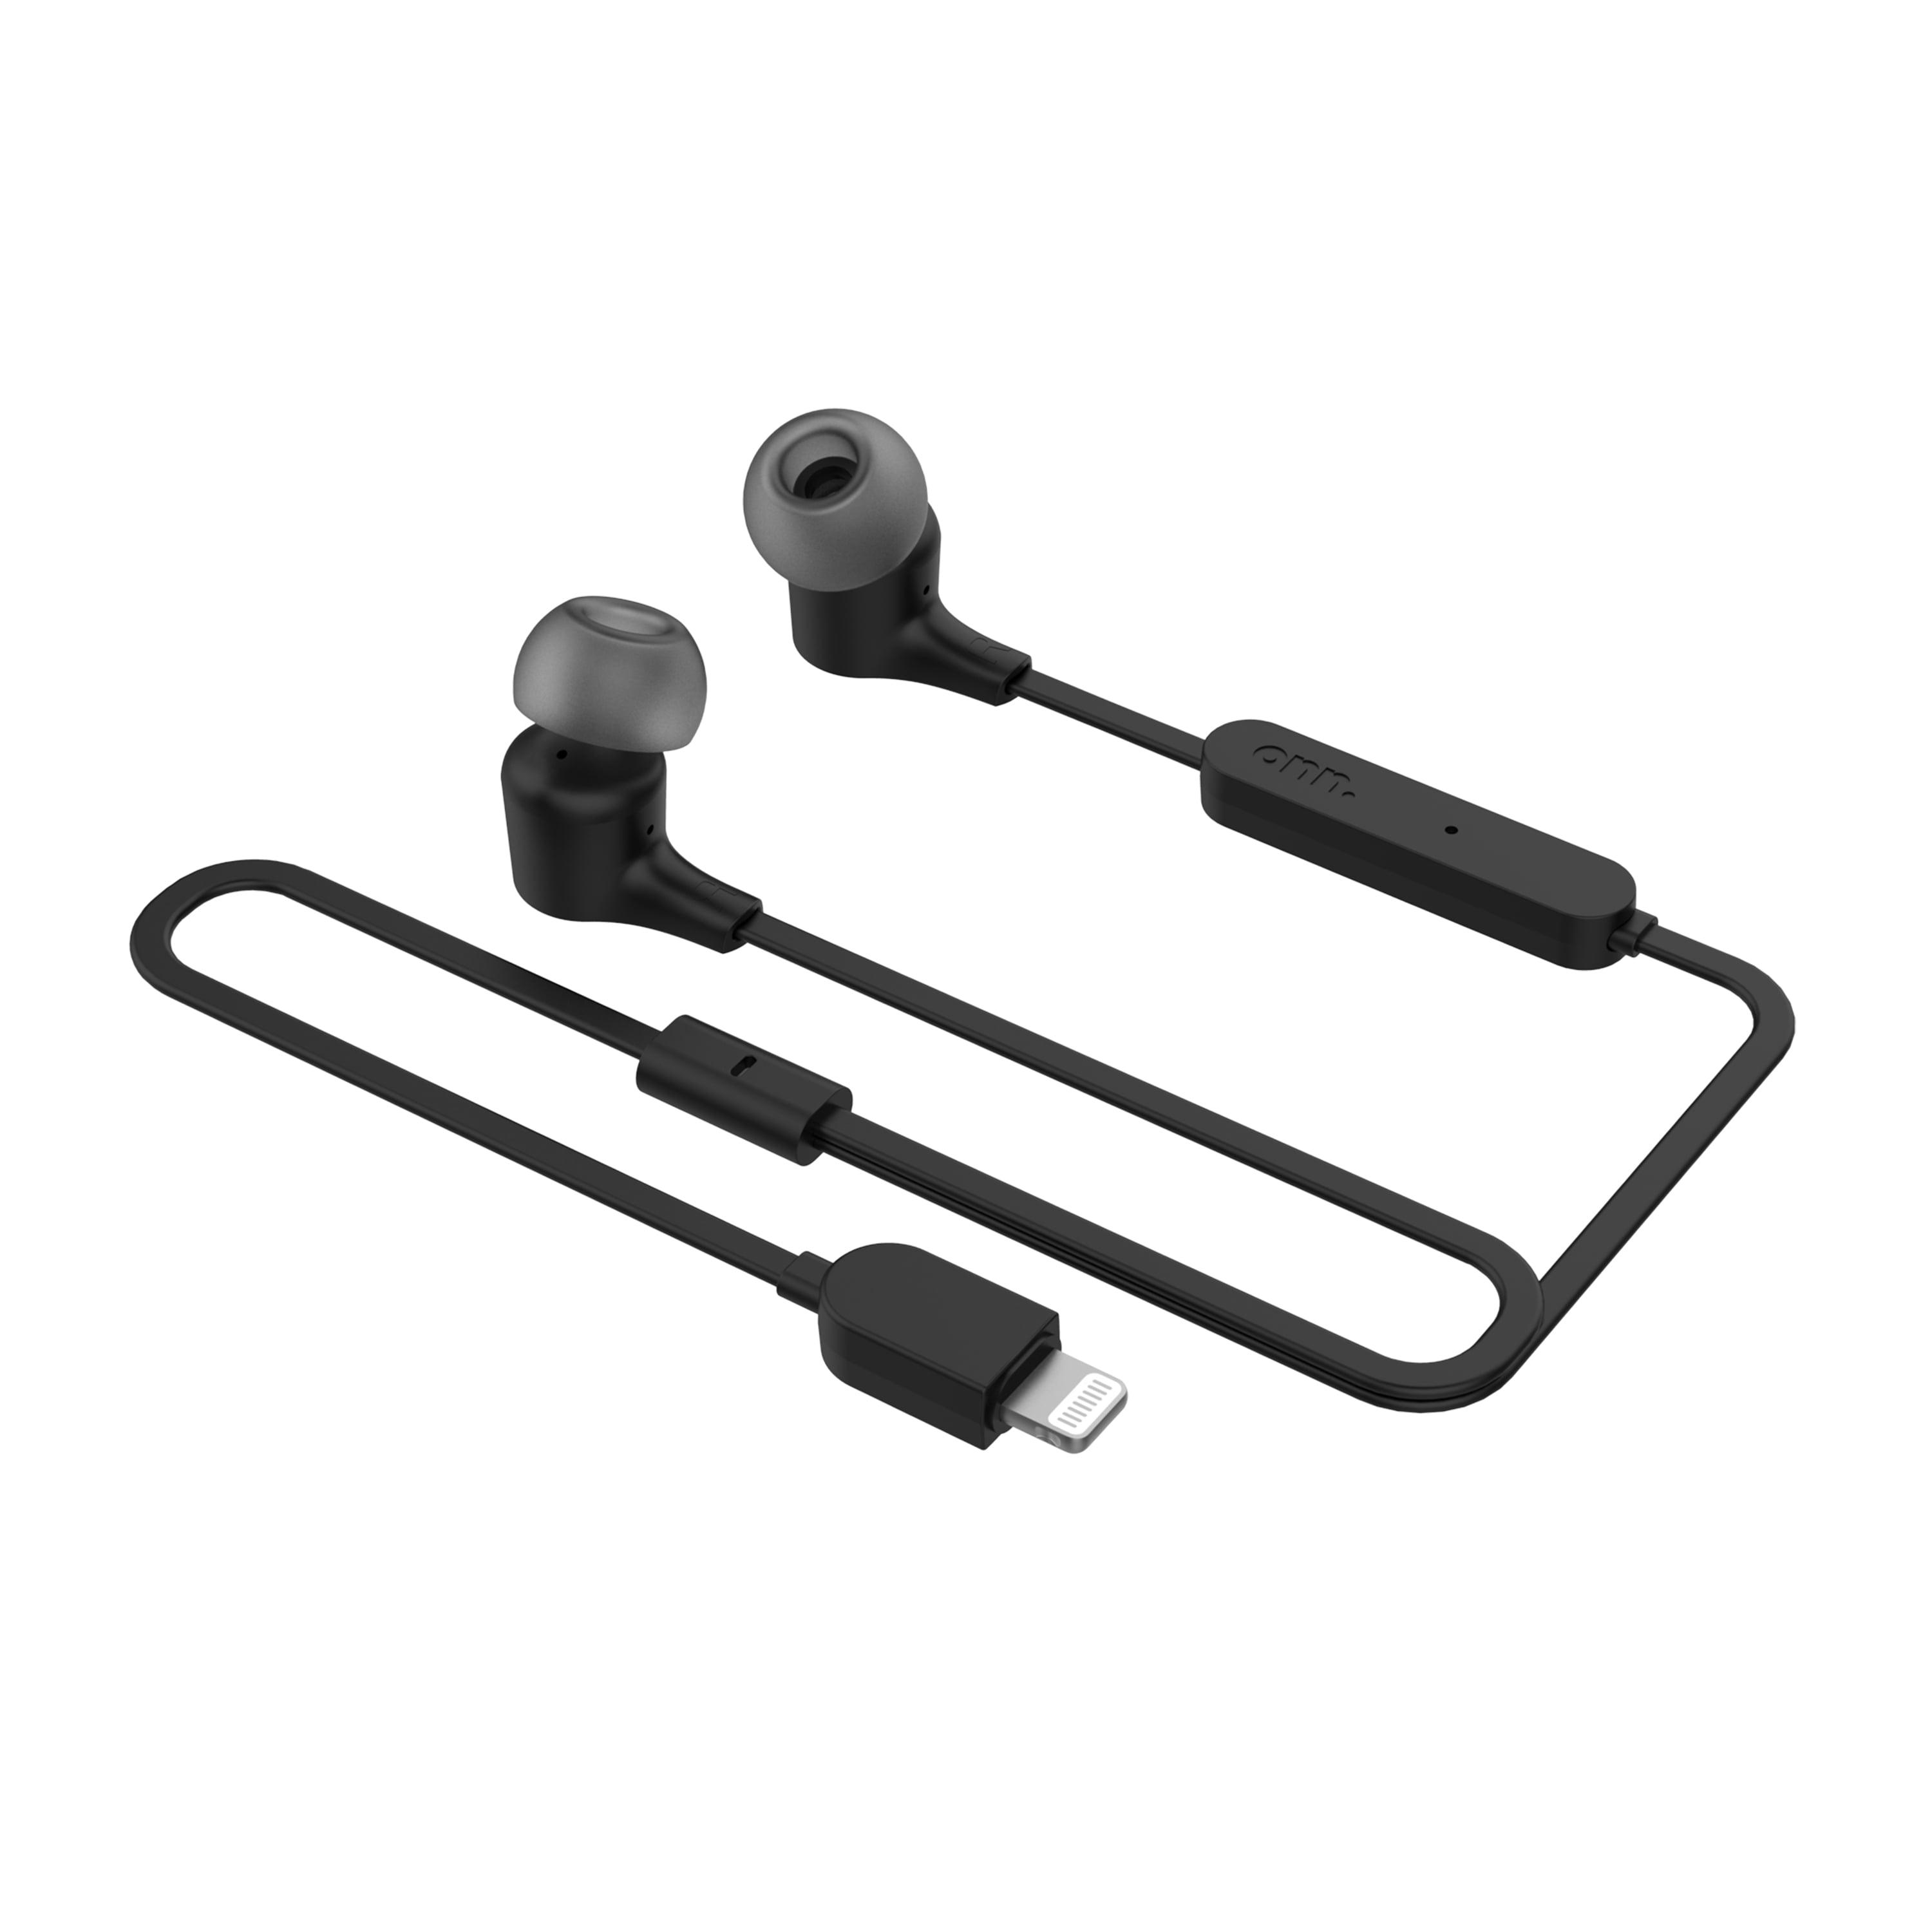 onn. In-ear Earphones with Microphone and Lightning Connector, Black